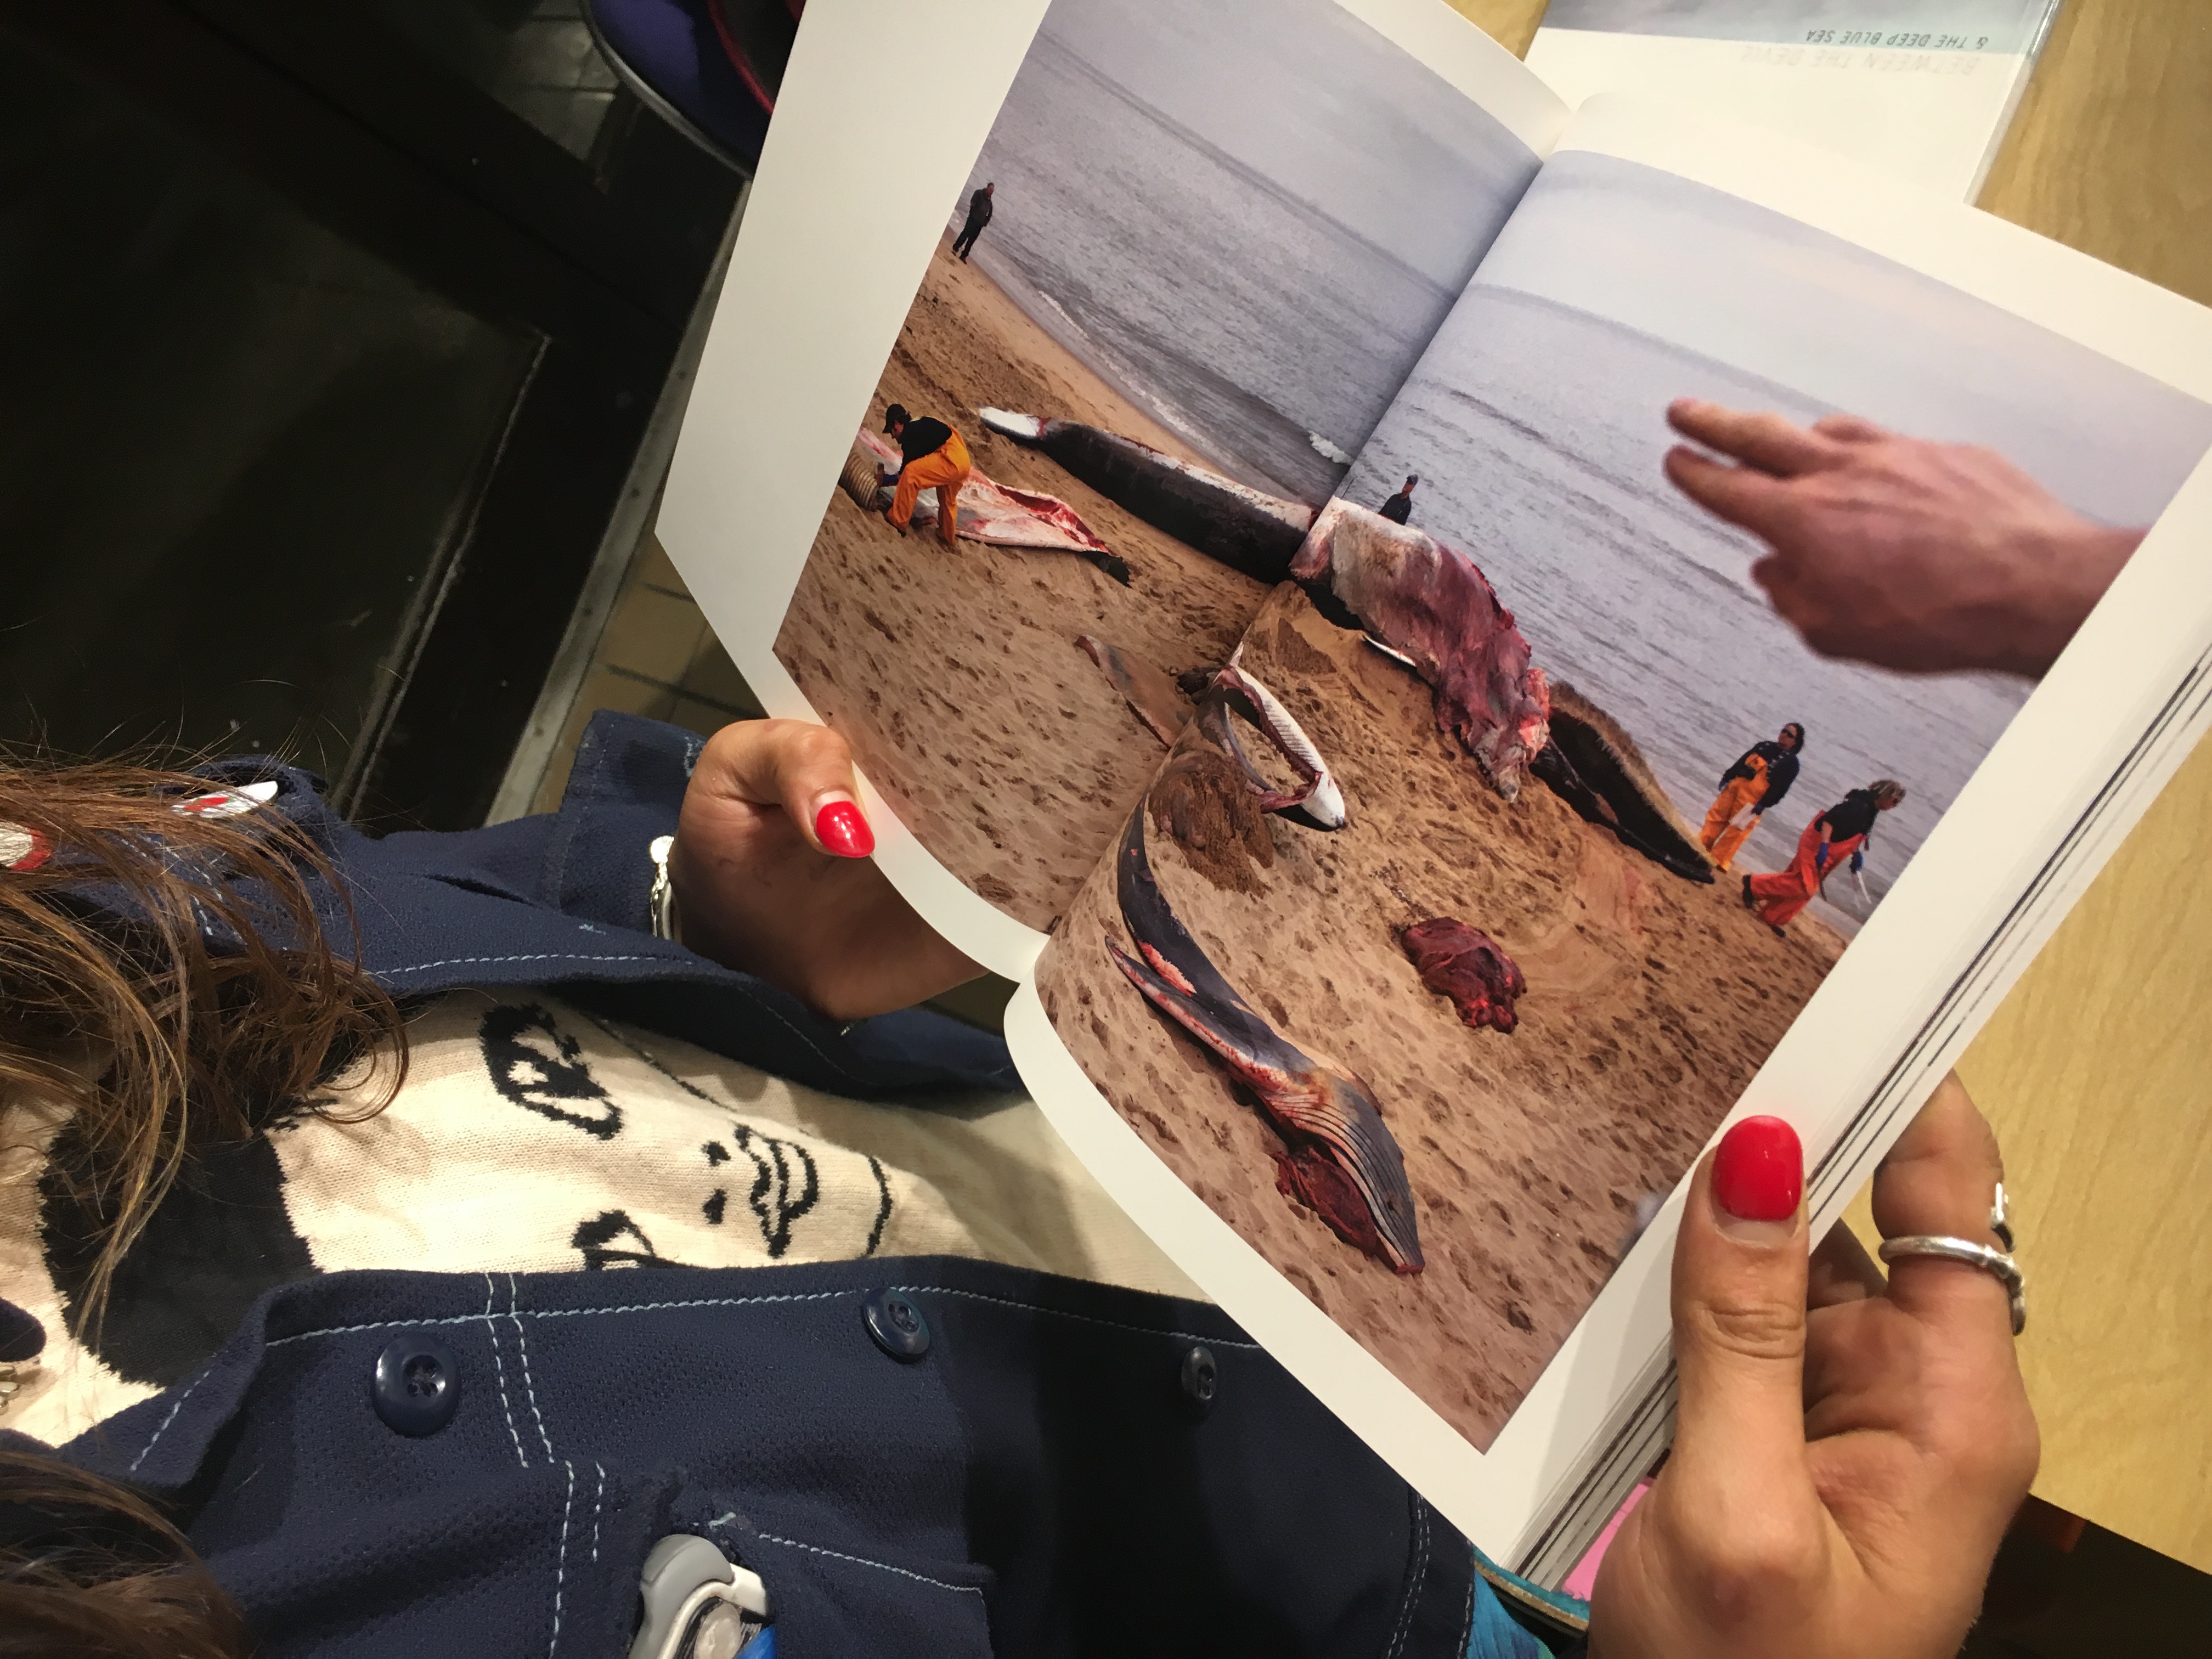 CCSF photography student Rebecca Diablo stares at a whale carcass photo in Preston Gannaway’s visual essay book, “Between the Devil and the Deep Blue Sea” on September 6, 2017. (Photo by Laurie Maemura) 